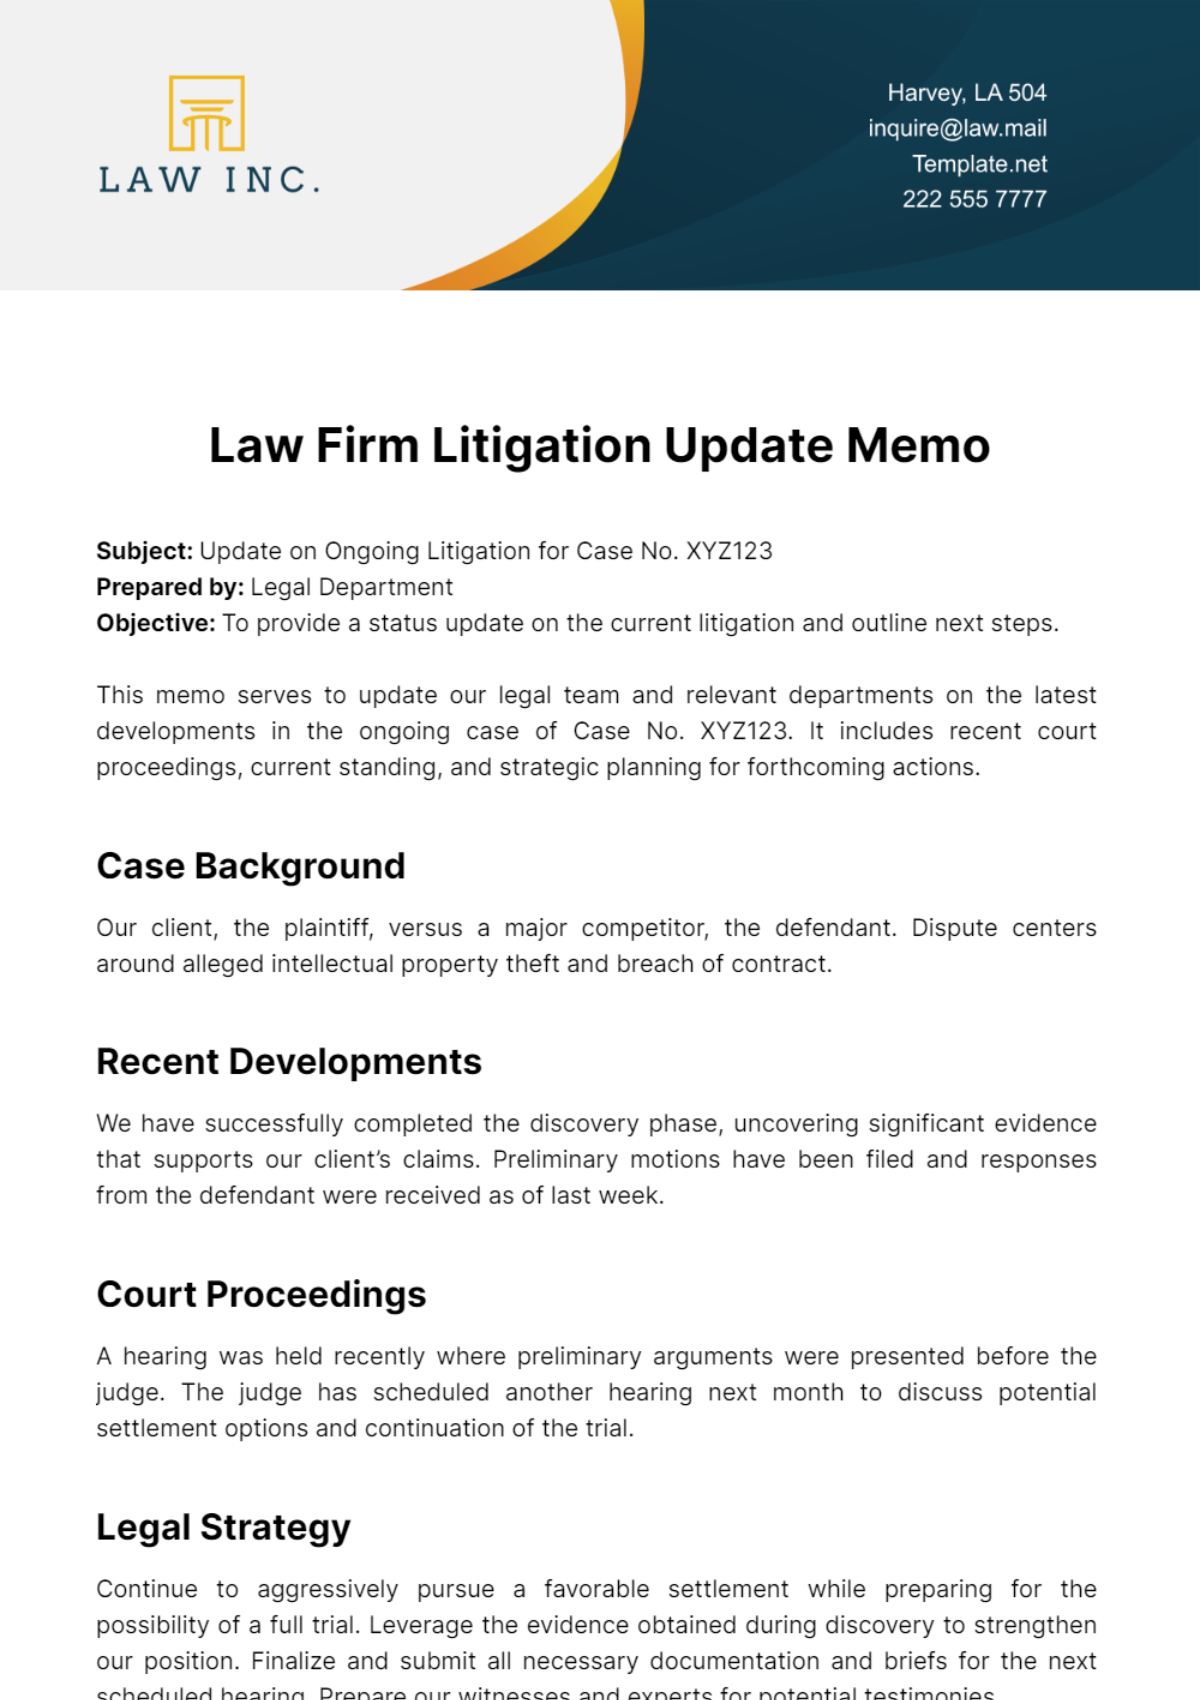 Free Law Firm Litigation Update Memo Template